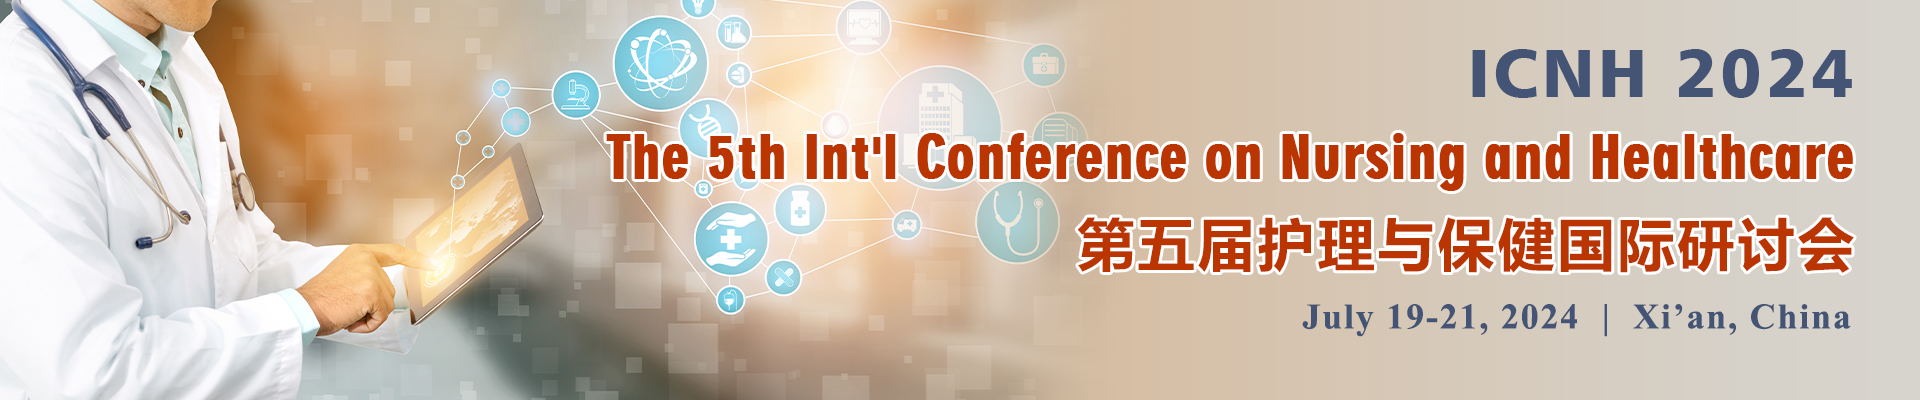 The 5th Int'l Conference on Nursing and Healthcare (ICNH 2024), Xi'an, Shaanxi, China